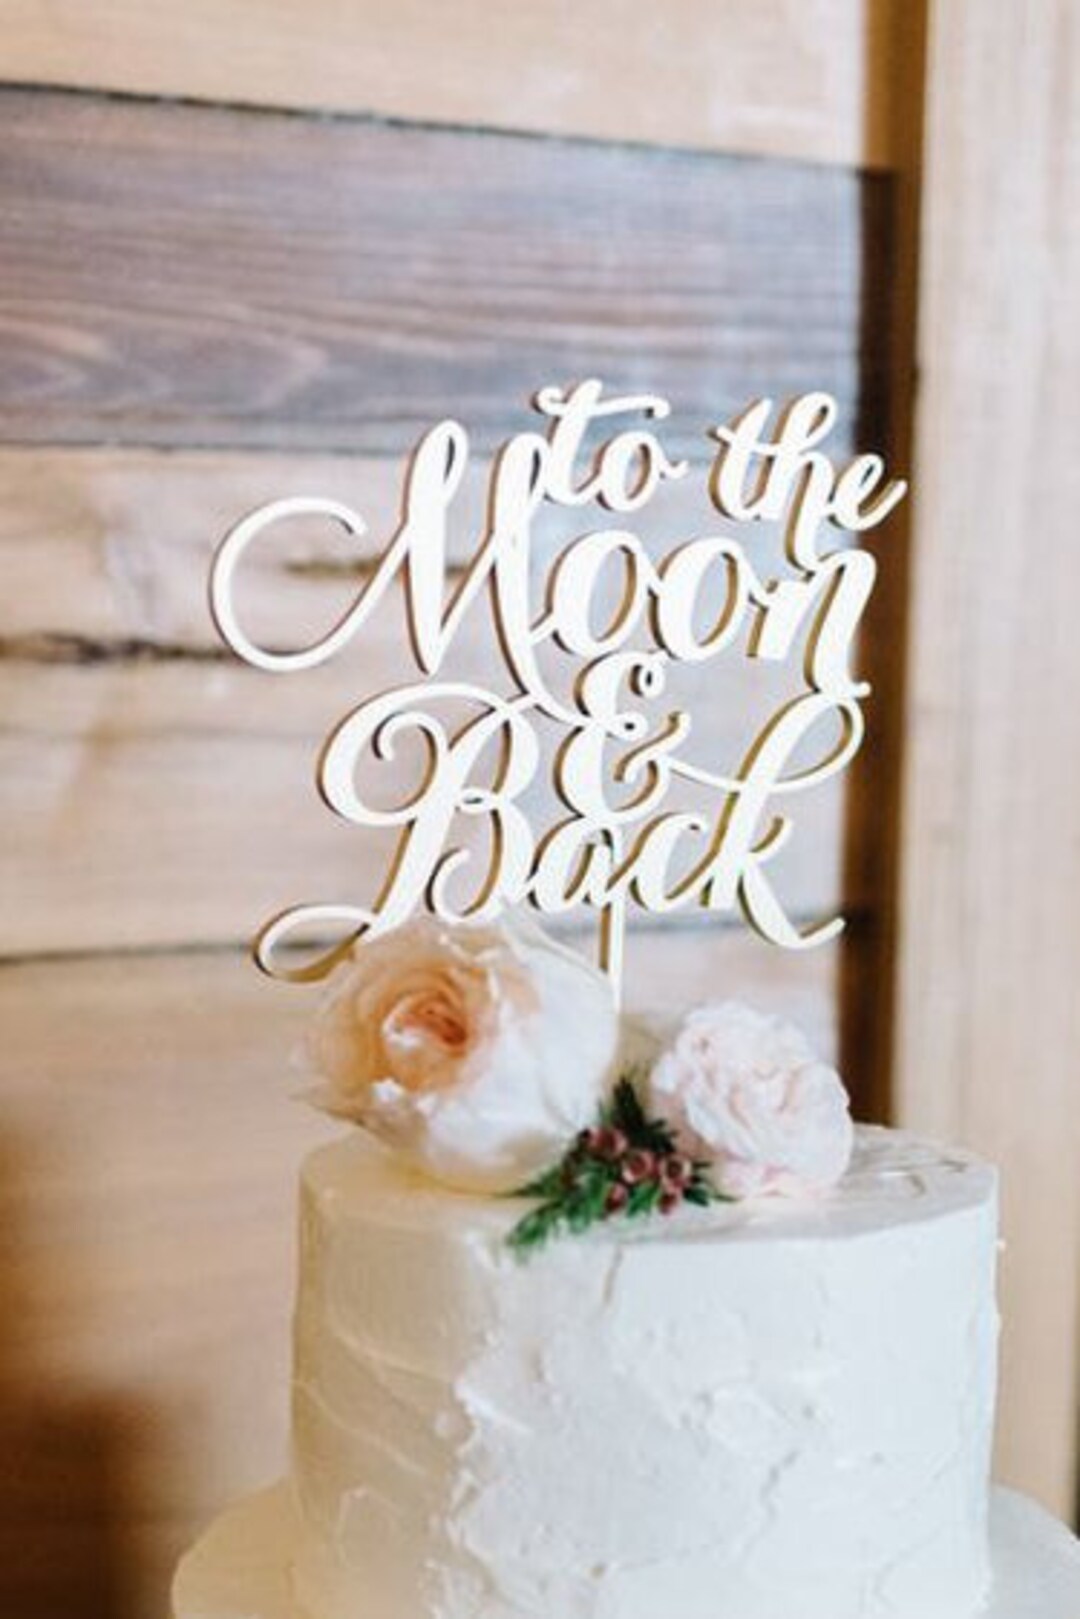 Gold Cake Topper to the Moon and Back.wedding Gold Cake Topper - Etsy